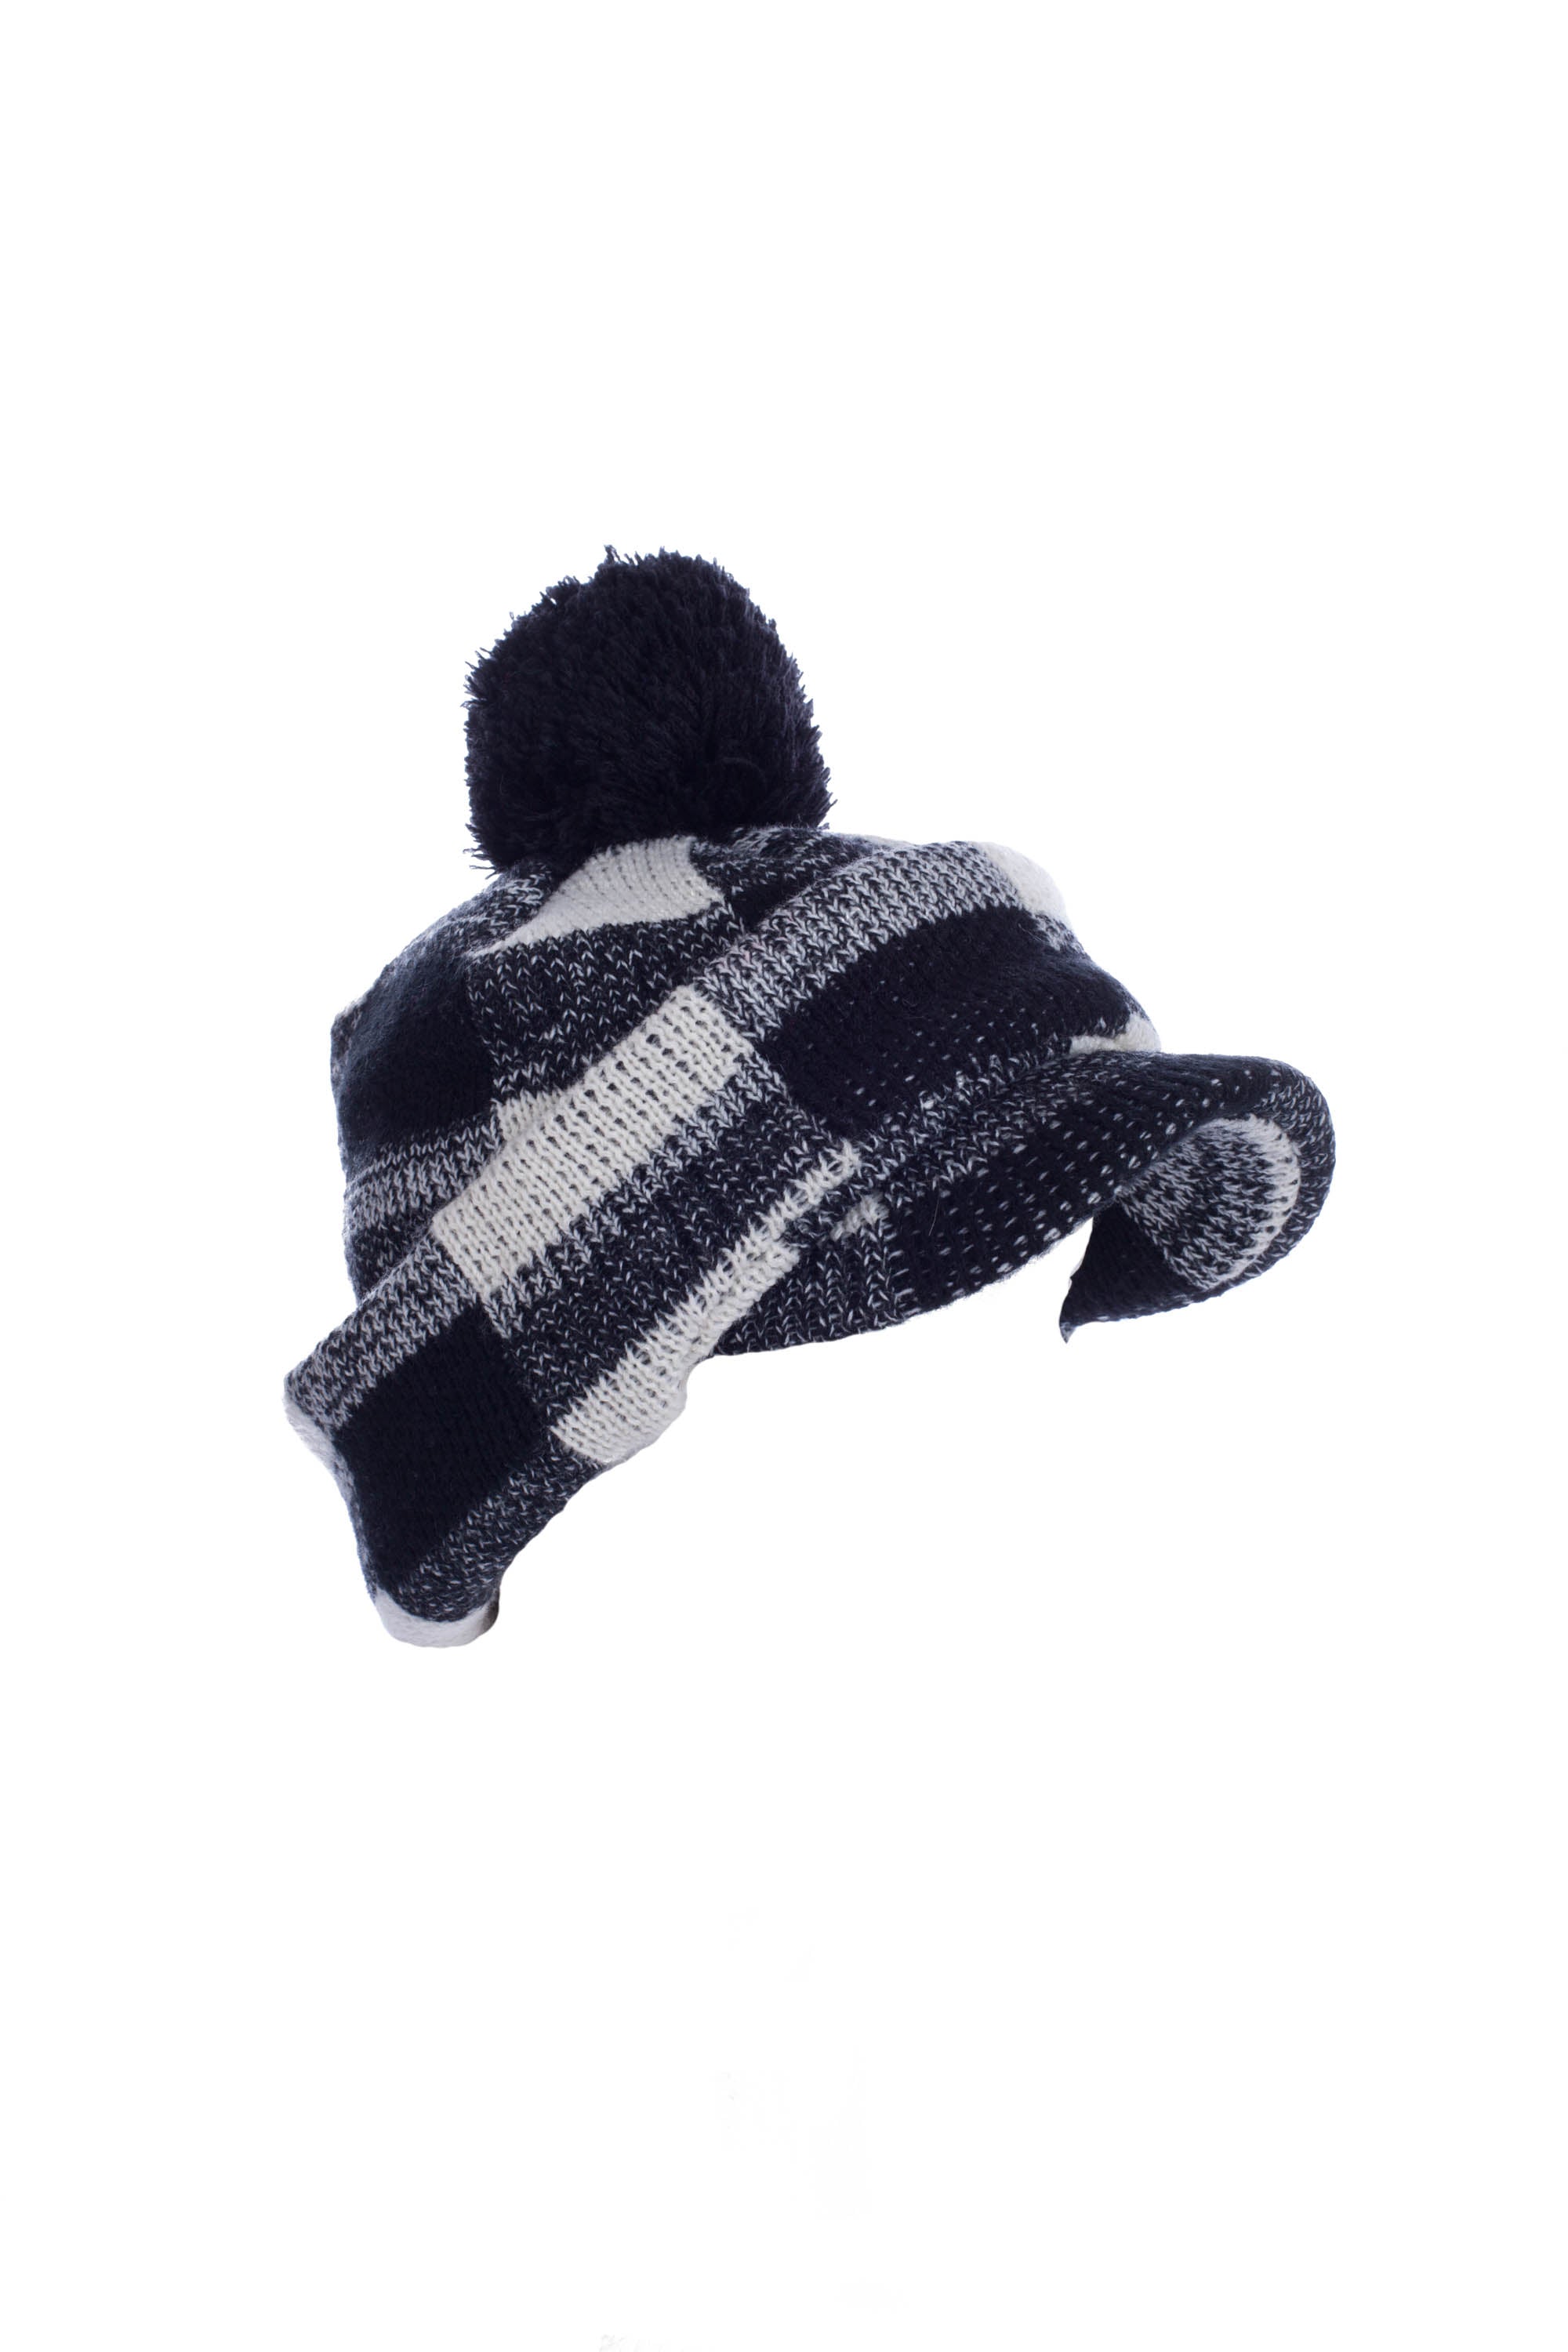 Black Checkered Pom Hat With Neck & Face Guard